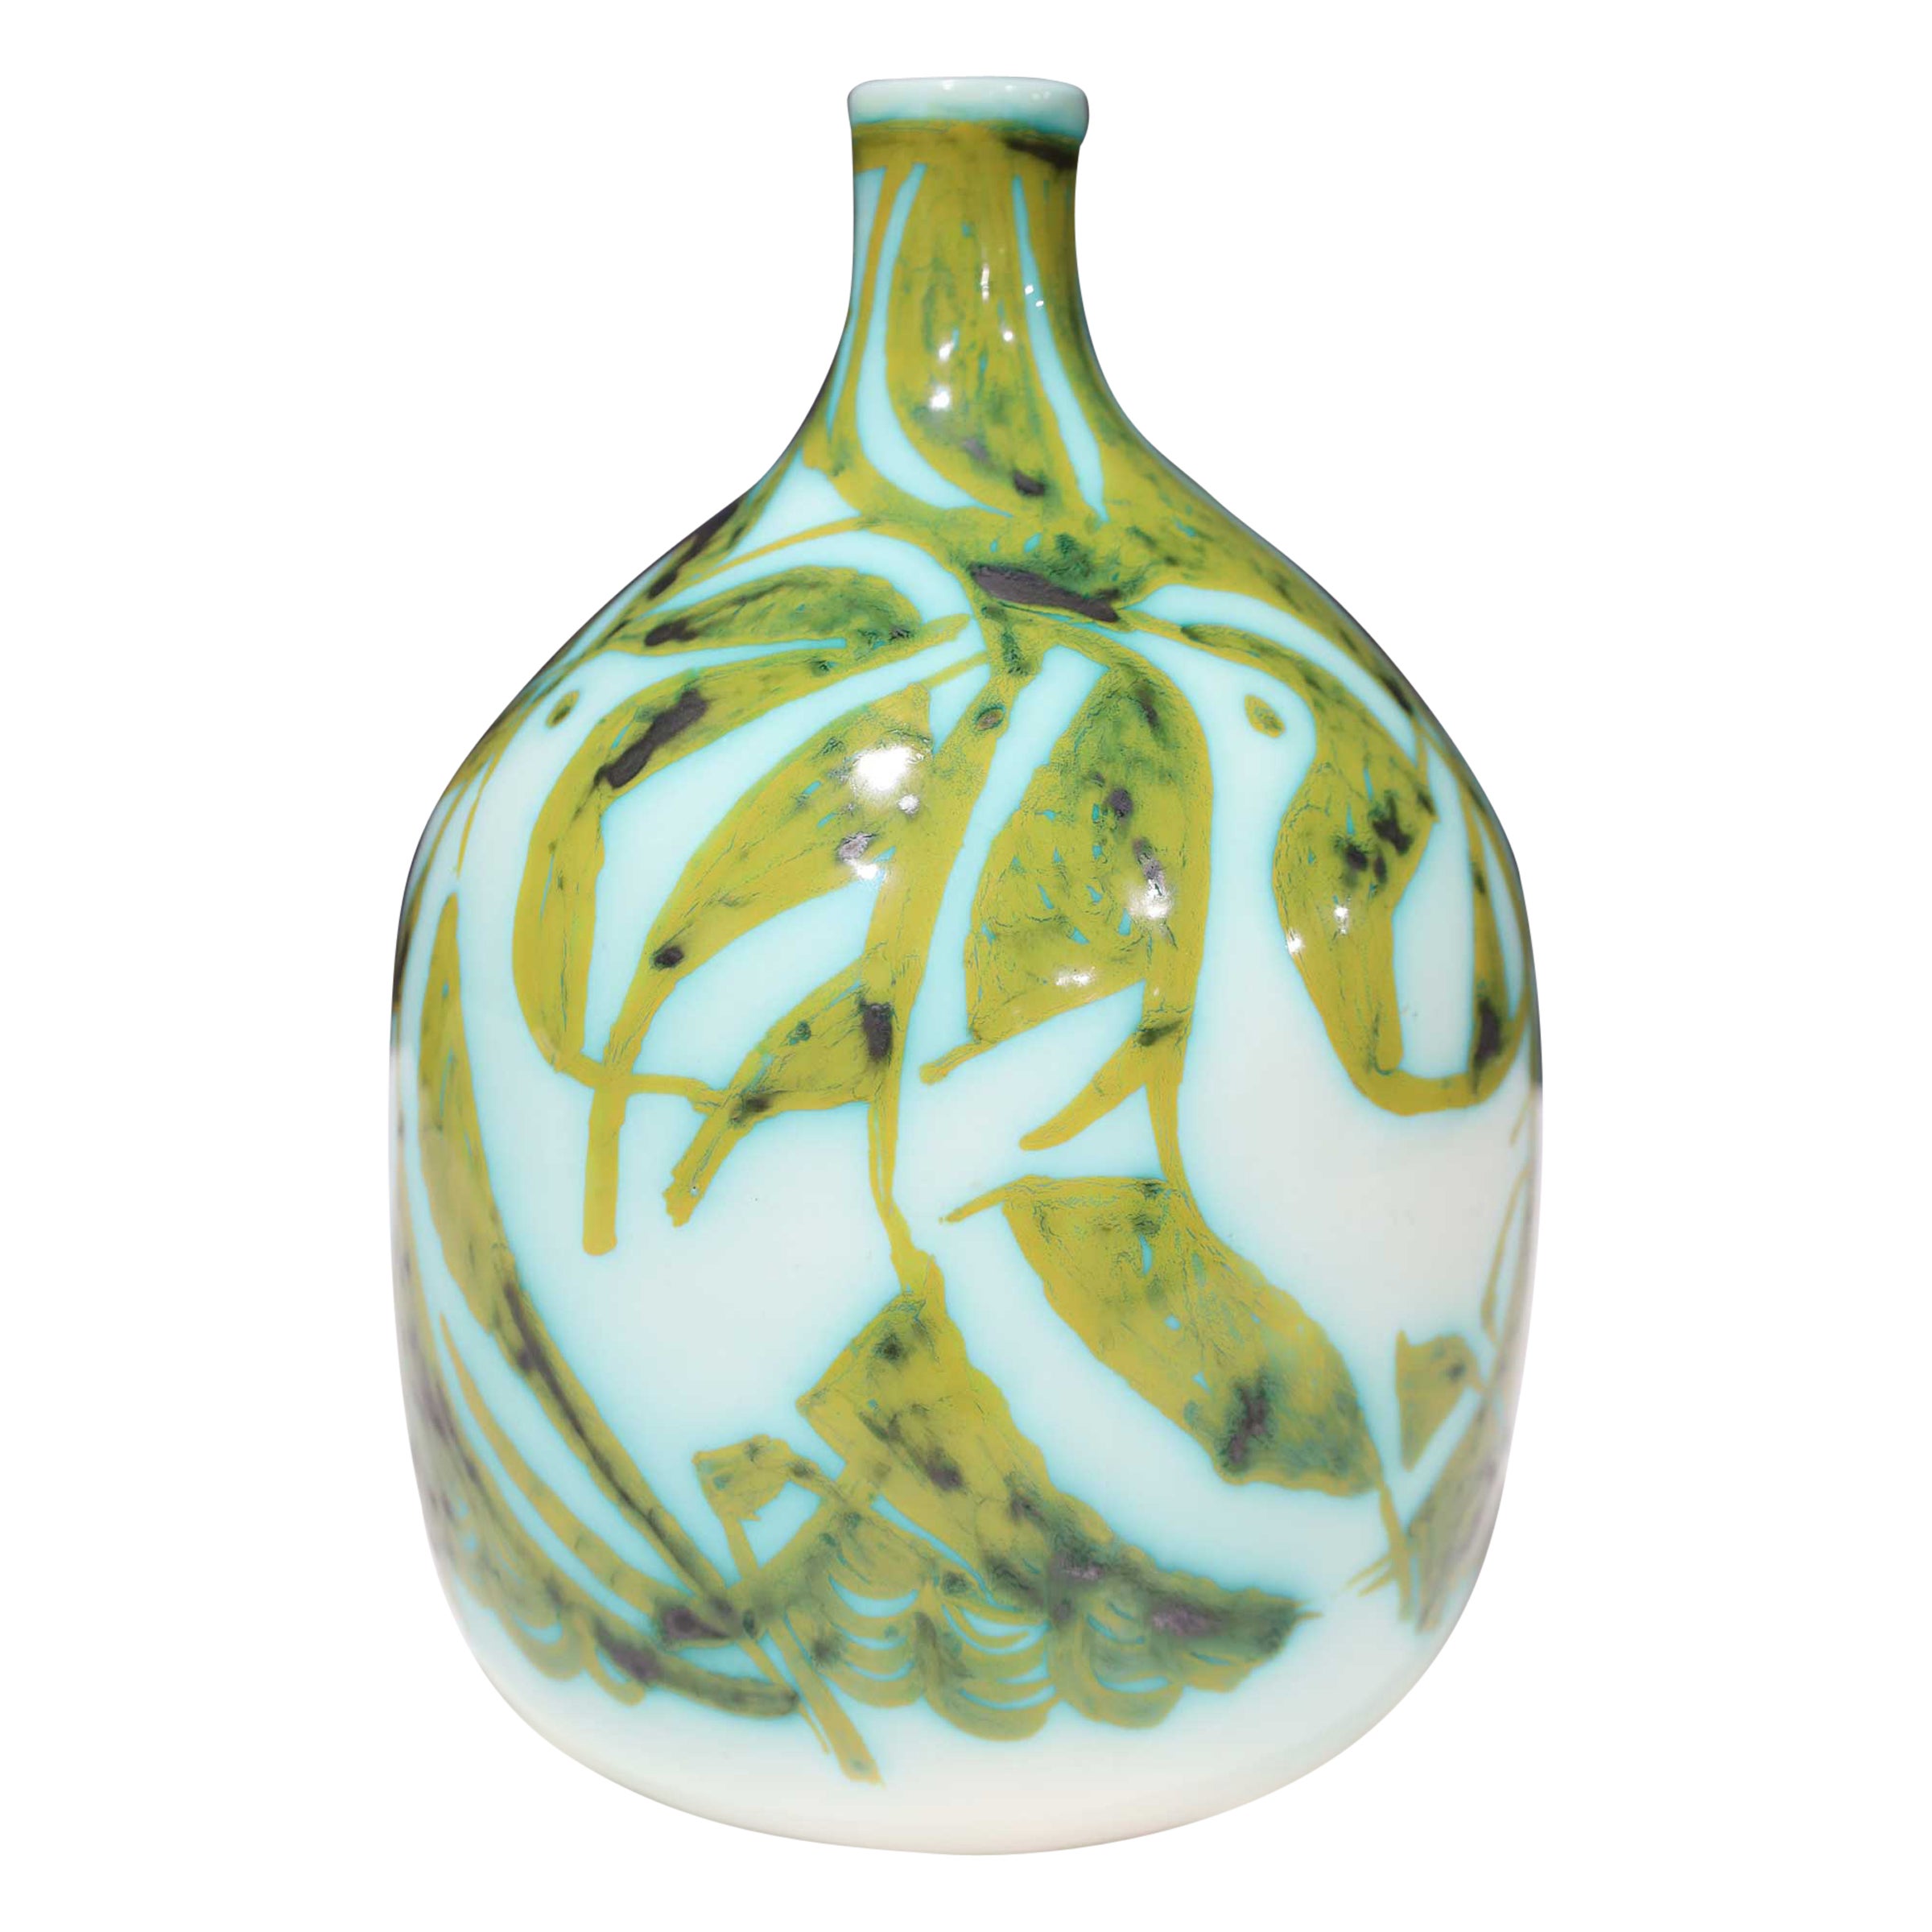 Alessio Tasca for Raymor Vase, Ceramic, Green and White, Signed For Sale